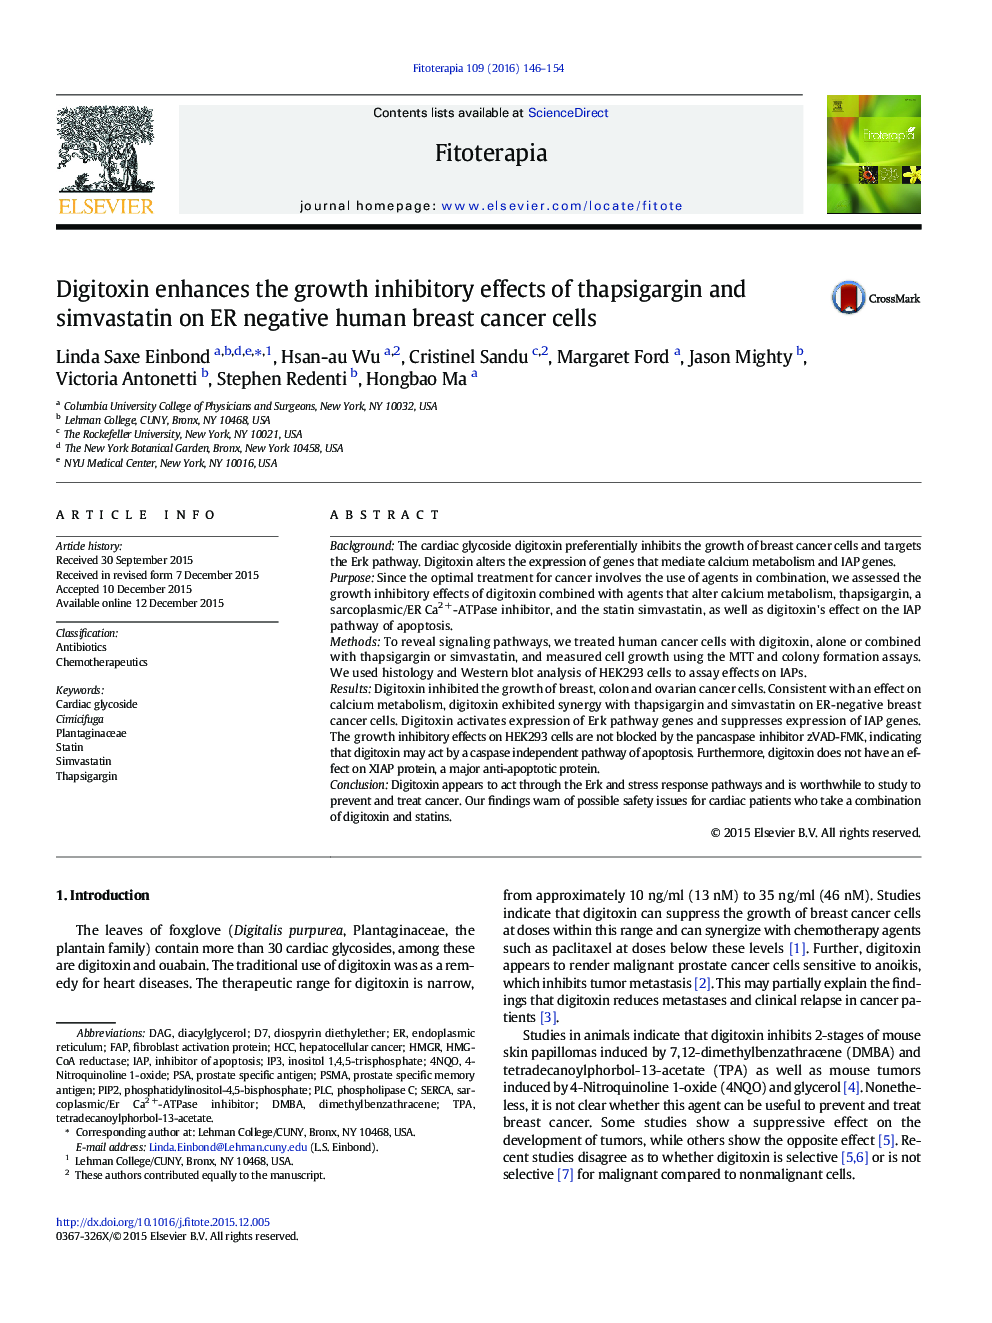 Digitoxin enhances the growth inhibitory effects of thapsigargin and simvastatin on ER negative human breast cancer cells